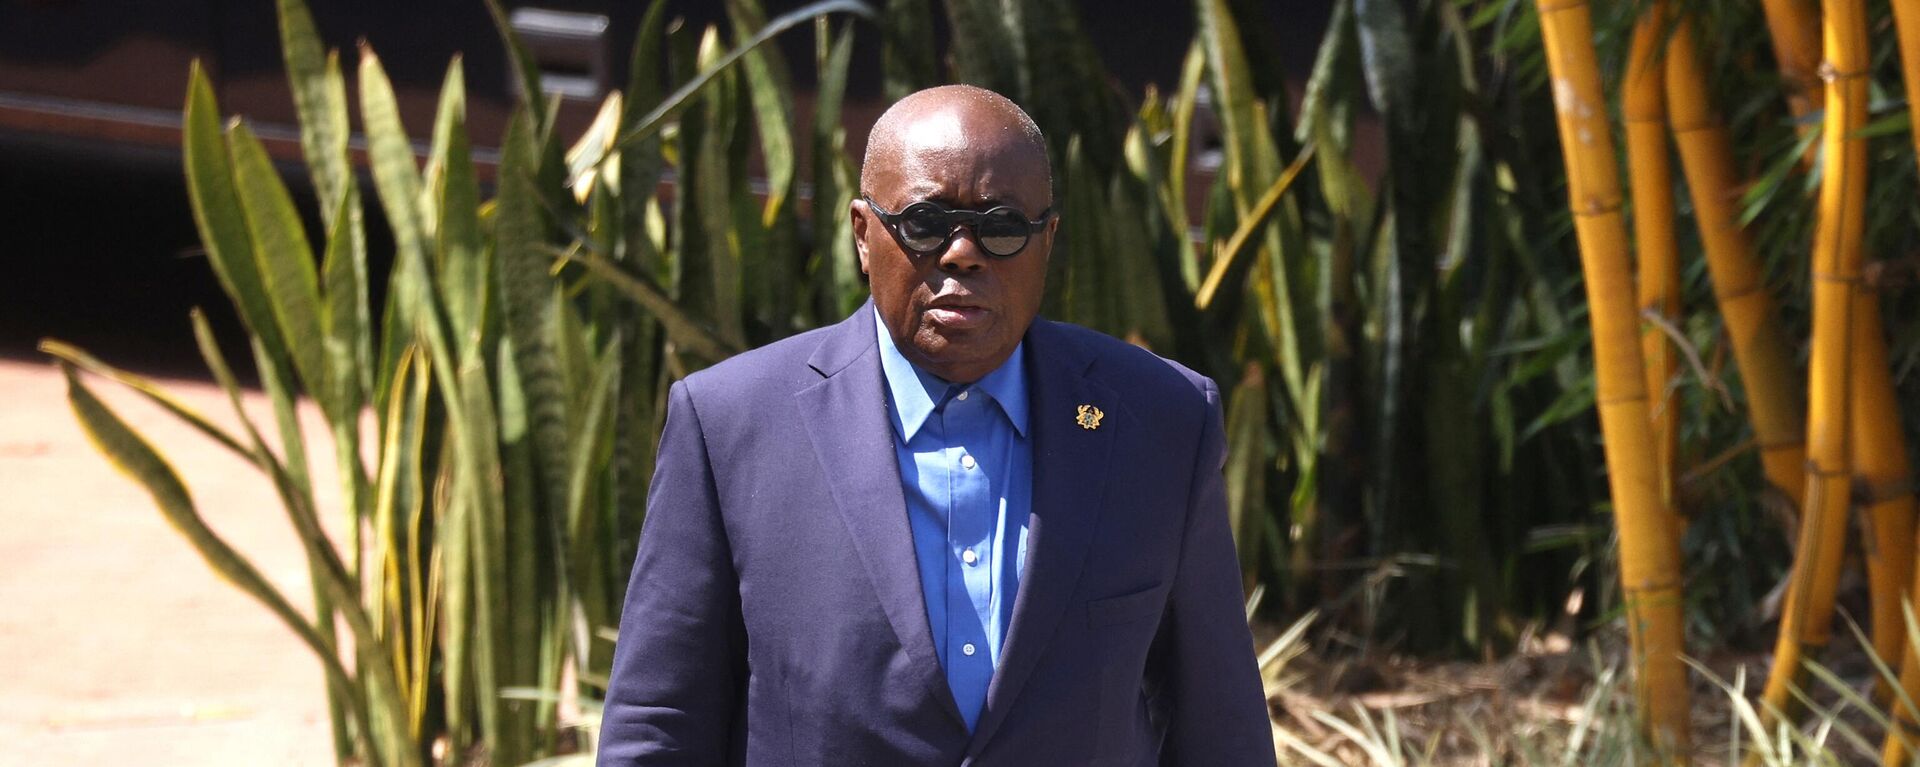 President of Ghana Nana Akufo-Addo arrives for day six of the Commonwealth Heads of Government Meeting (CHOGM) at the Intare Conference centre in Kigali on June 25, 2022. - Sputnik International, 1920, 14.12.2022